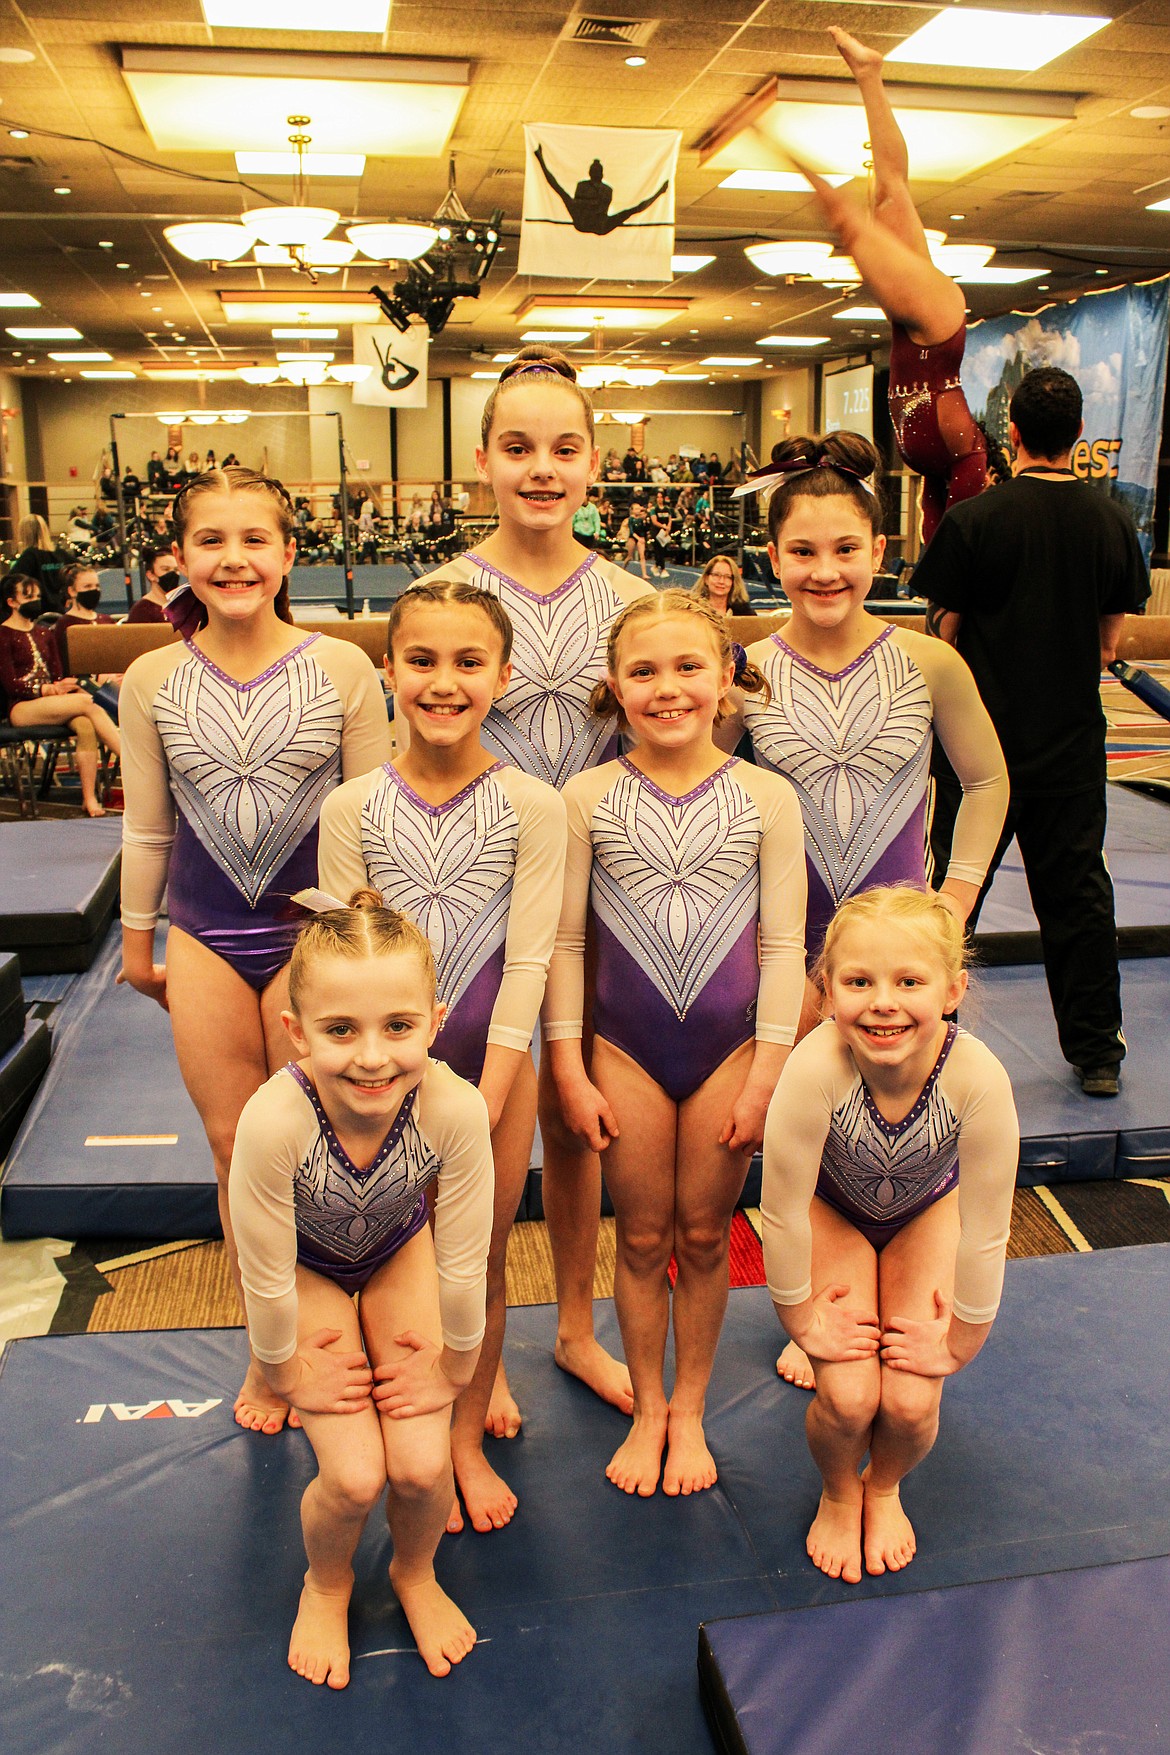 Courtesy photo
Avant Coeur Level 4s at Great West Gym Fest at The Coeur d'Alene Resort last weekend. In the front from left are Sydney Traub and Kaylee Flodin; middle row from left, Taniella Atteshis and Olivia Watson; and back row from left, Issoria Austin, Elika Anderson and Audri Madsen.